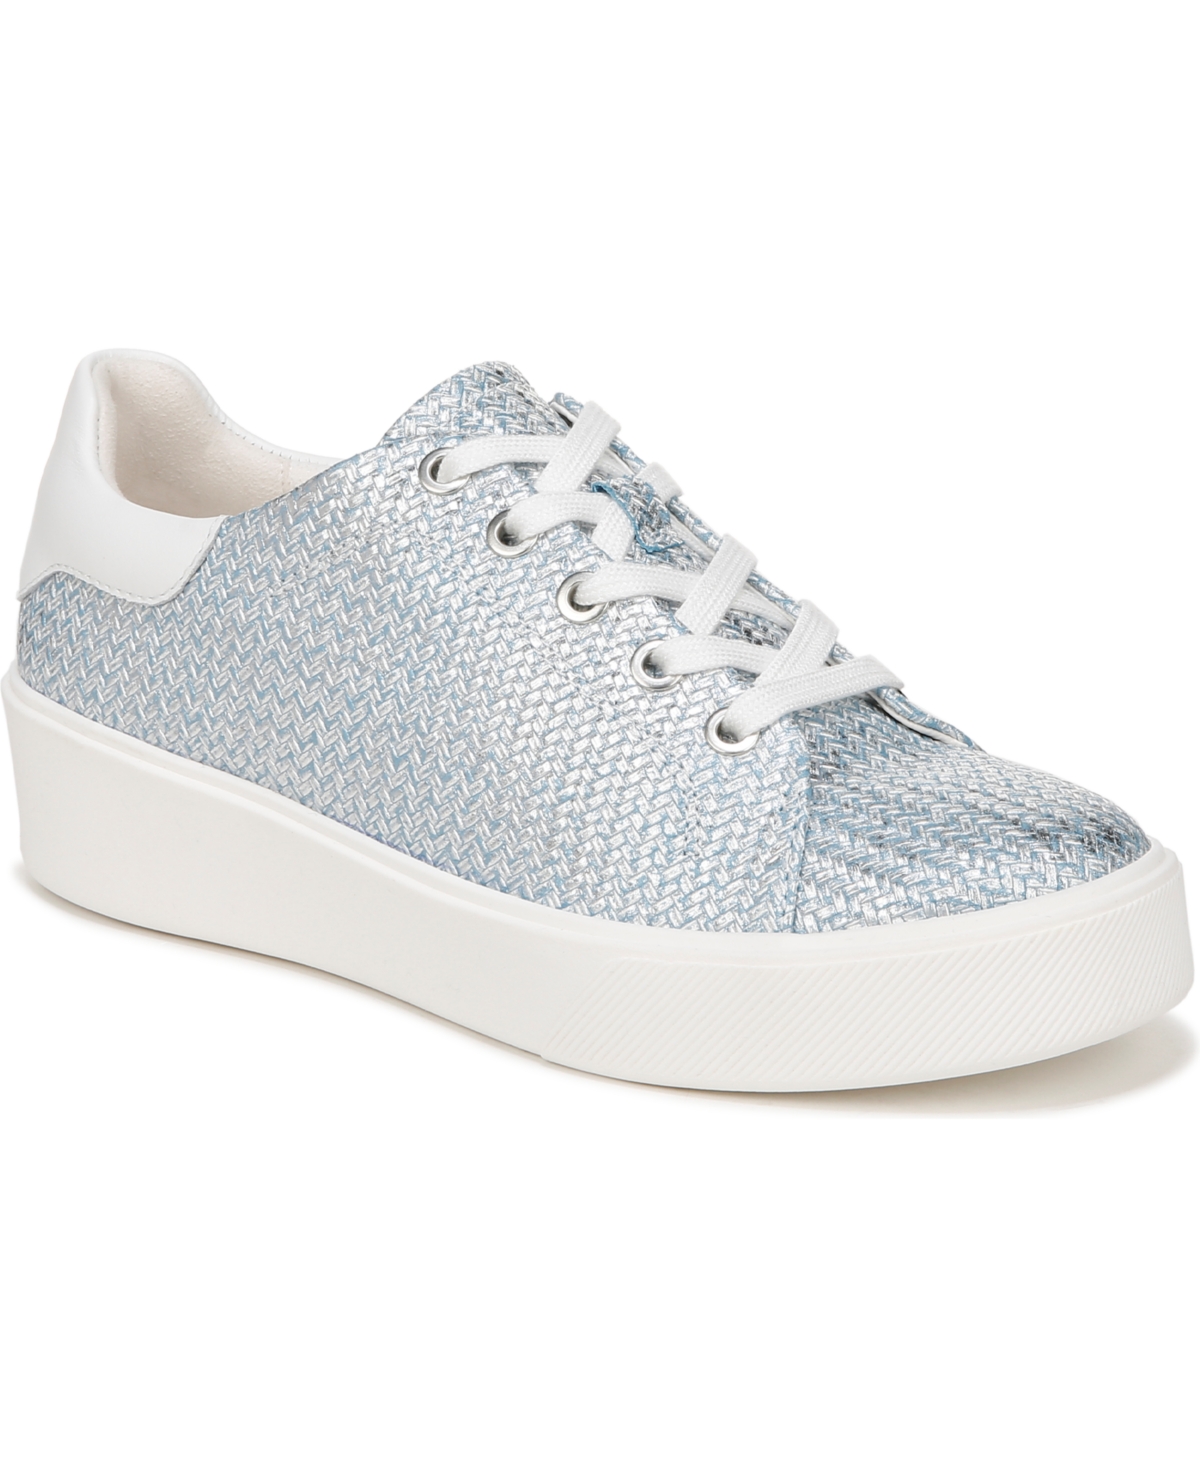 Shop Naturalizer Morrison 2.0 Sneakers In Metallic Blue Woven Embossed Leather